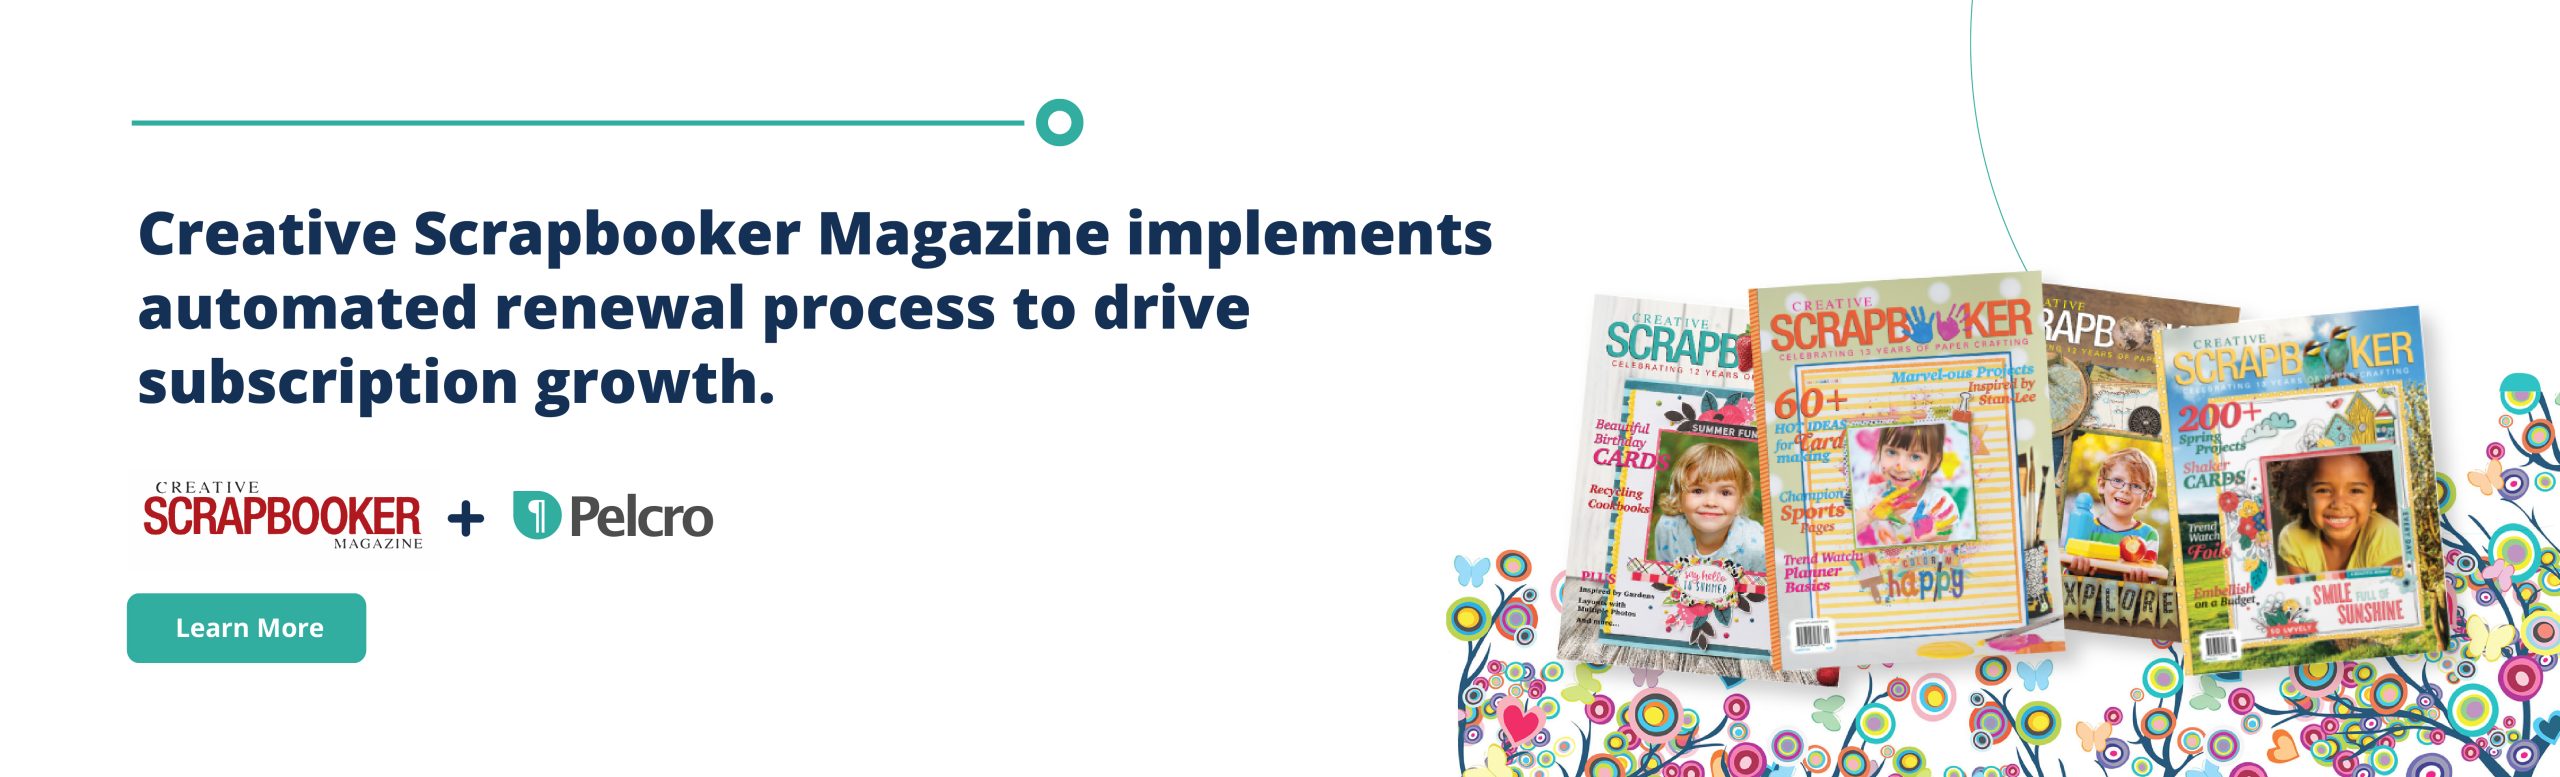 Scrapbooker Magazine uses Pelcro auto renewal feature to grow subscriptions